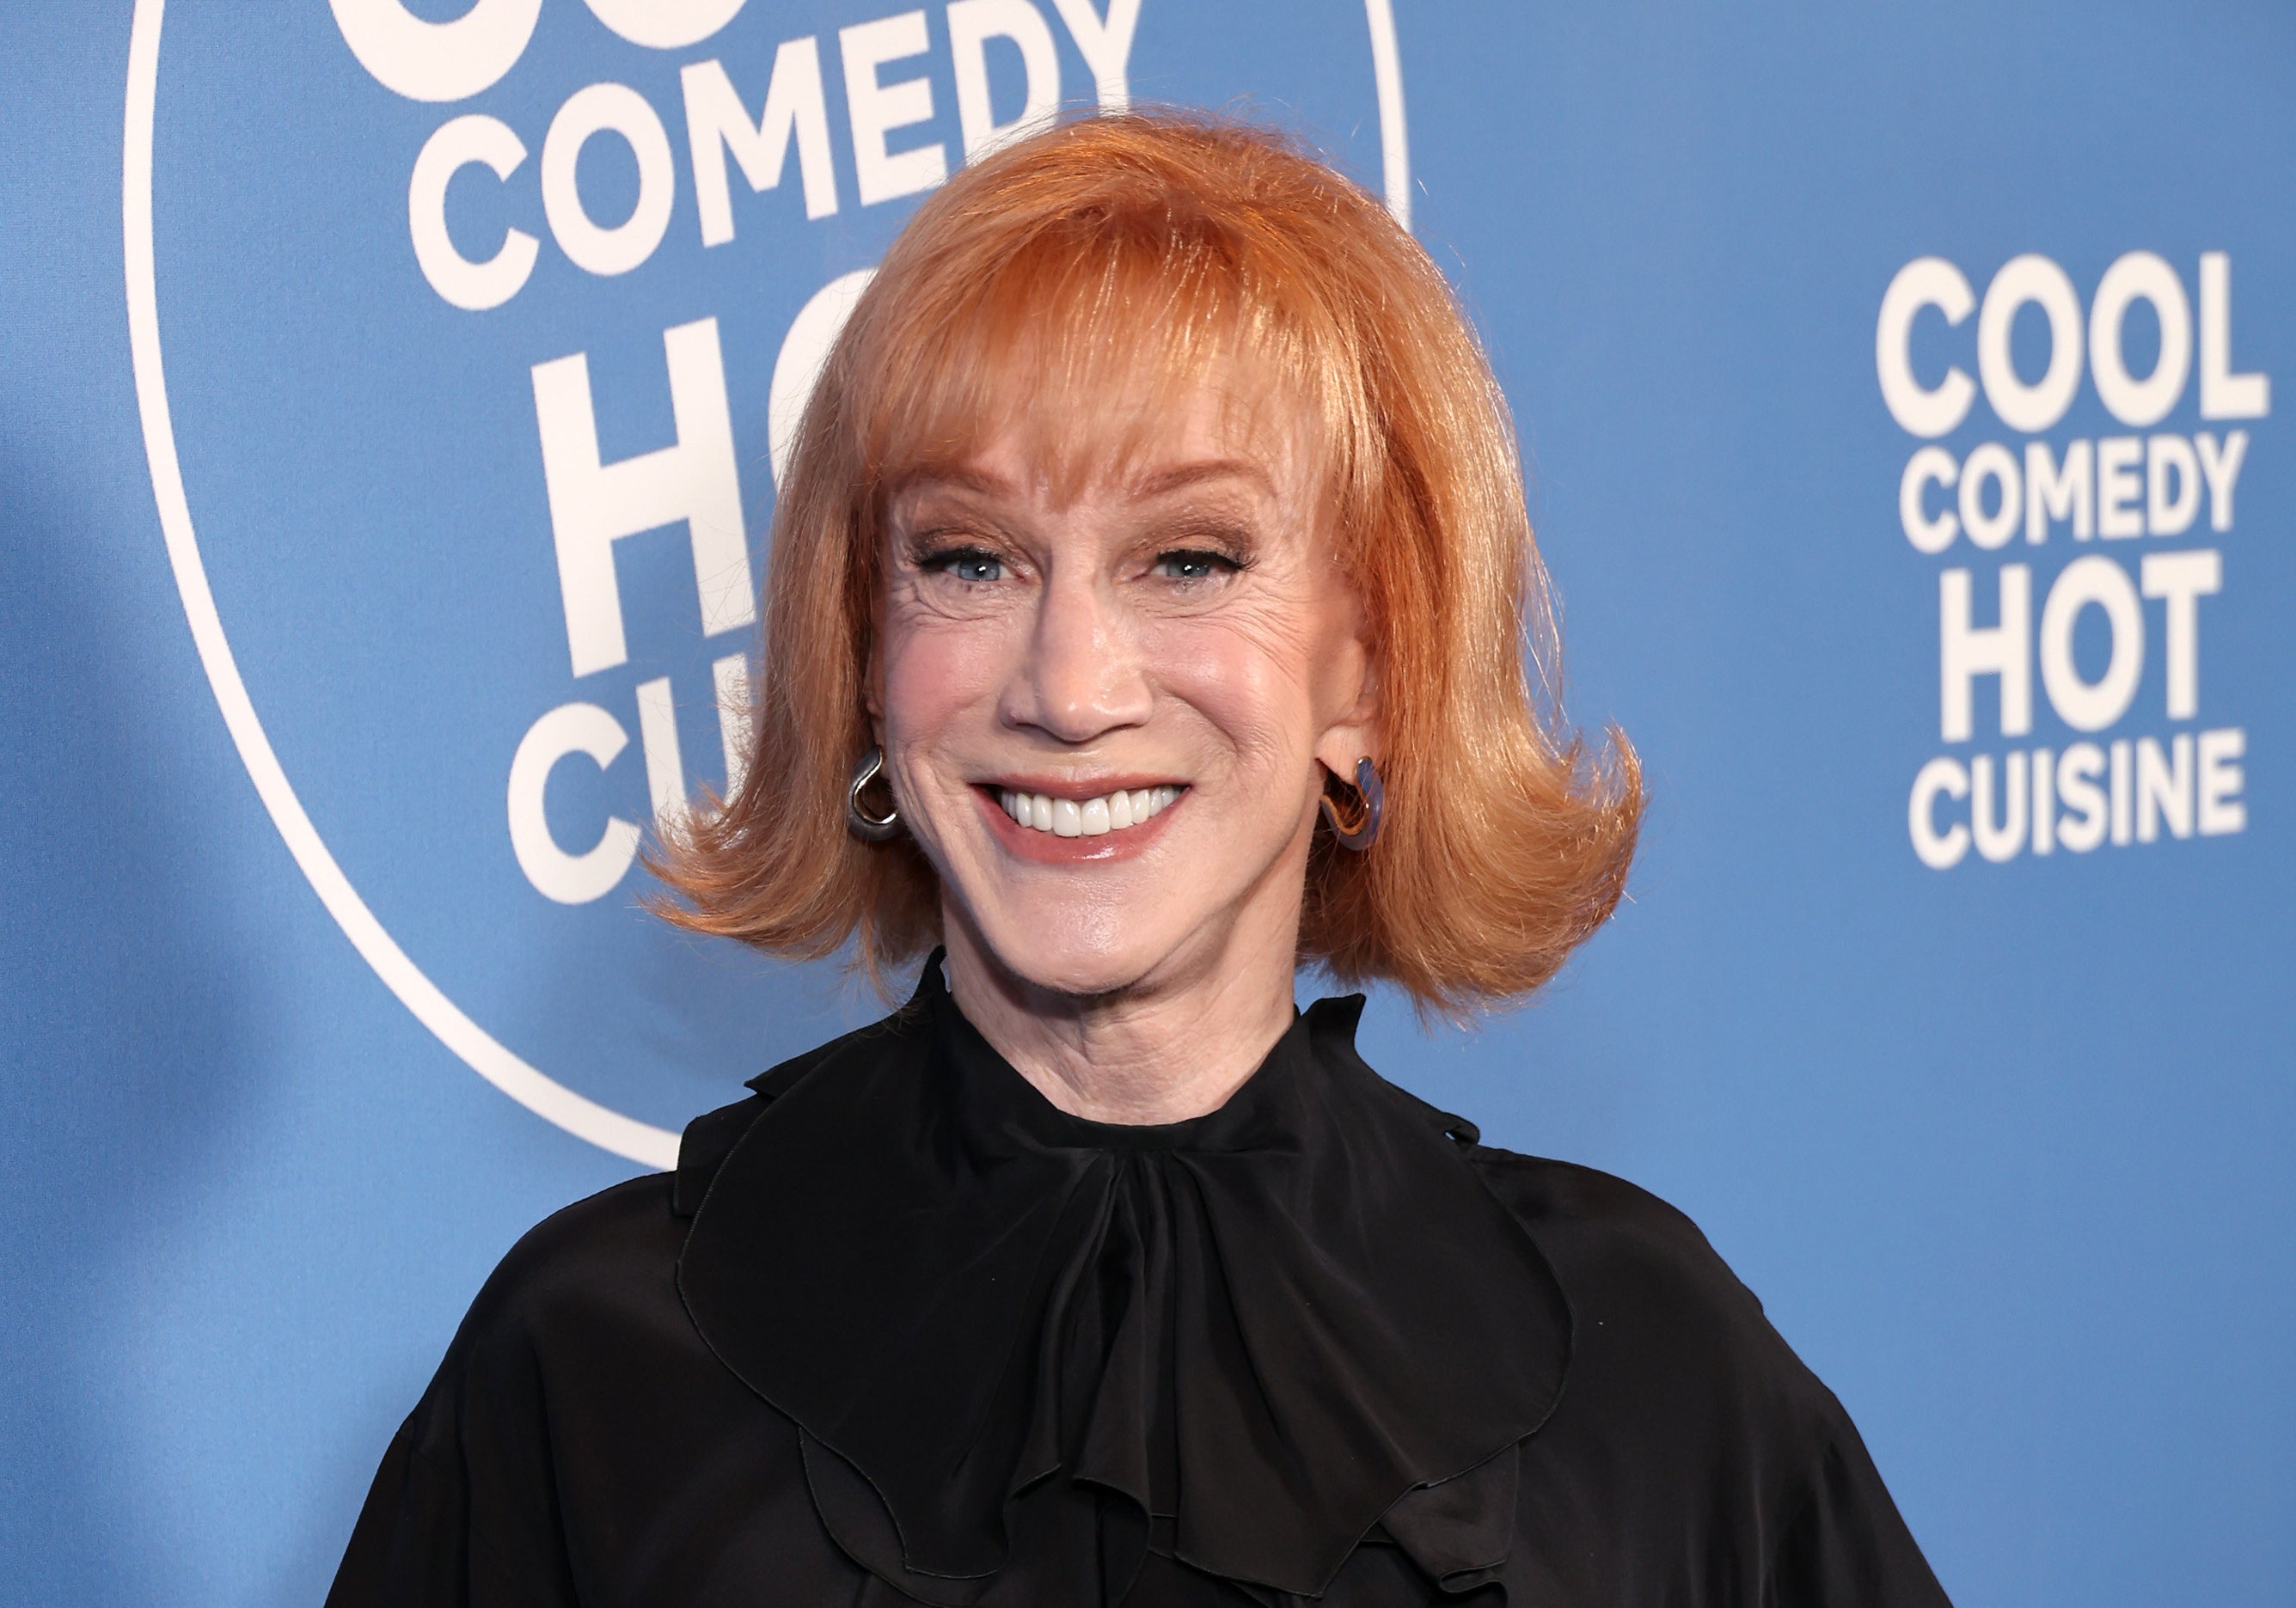 kathy griffin smiling in a black dress